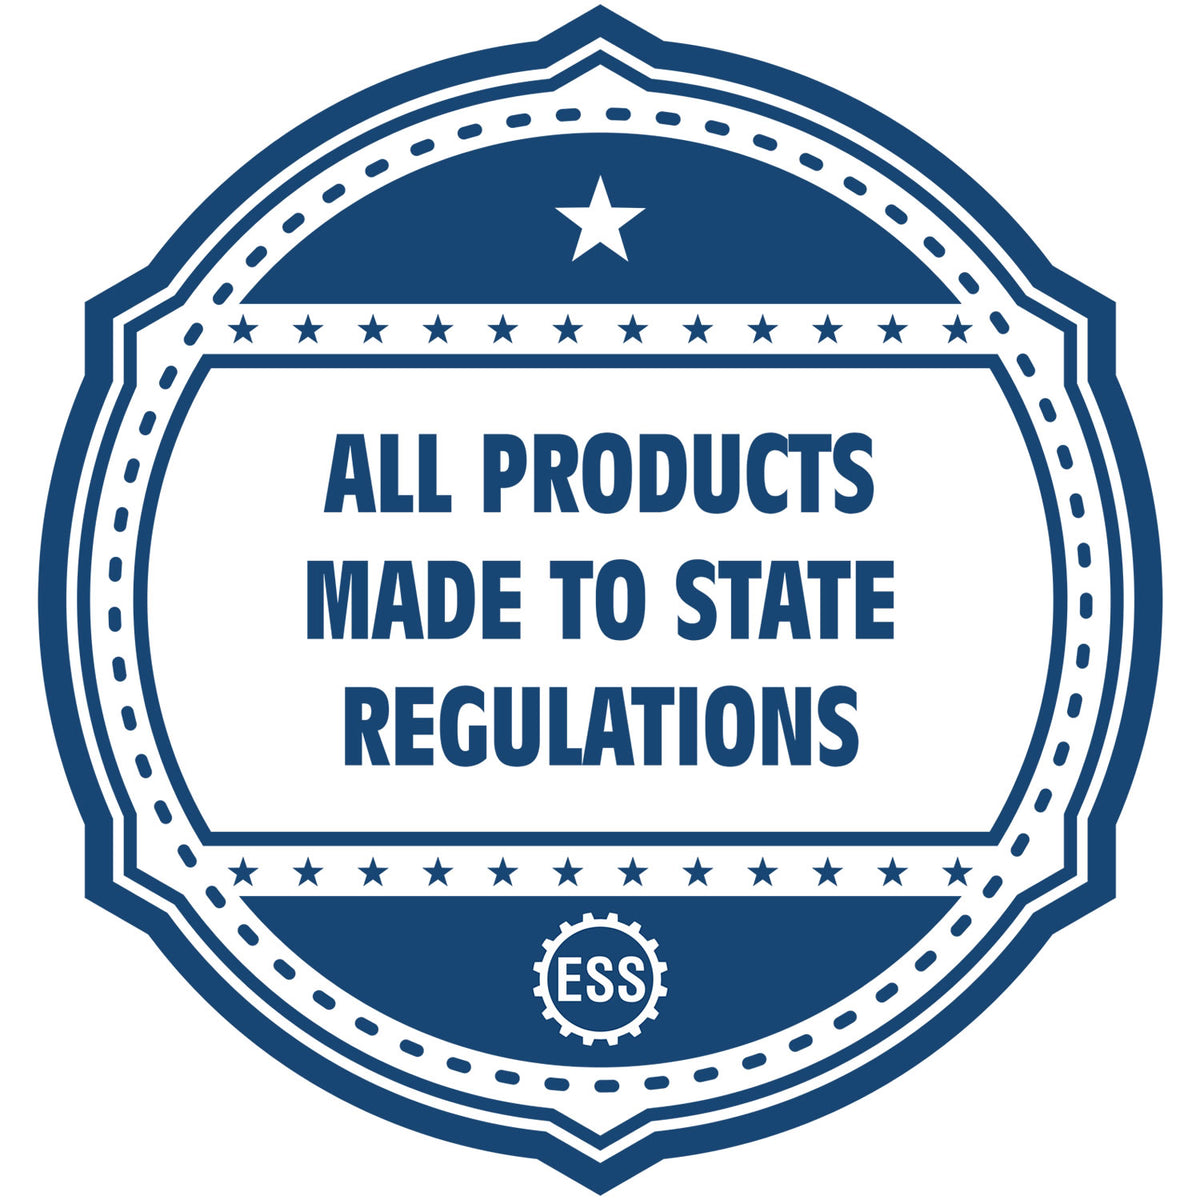 An icon or badge element for the Self-Inking State Seal Mississippi Notary Stamp showing that this product is made in compliance with state regulations.